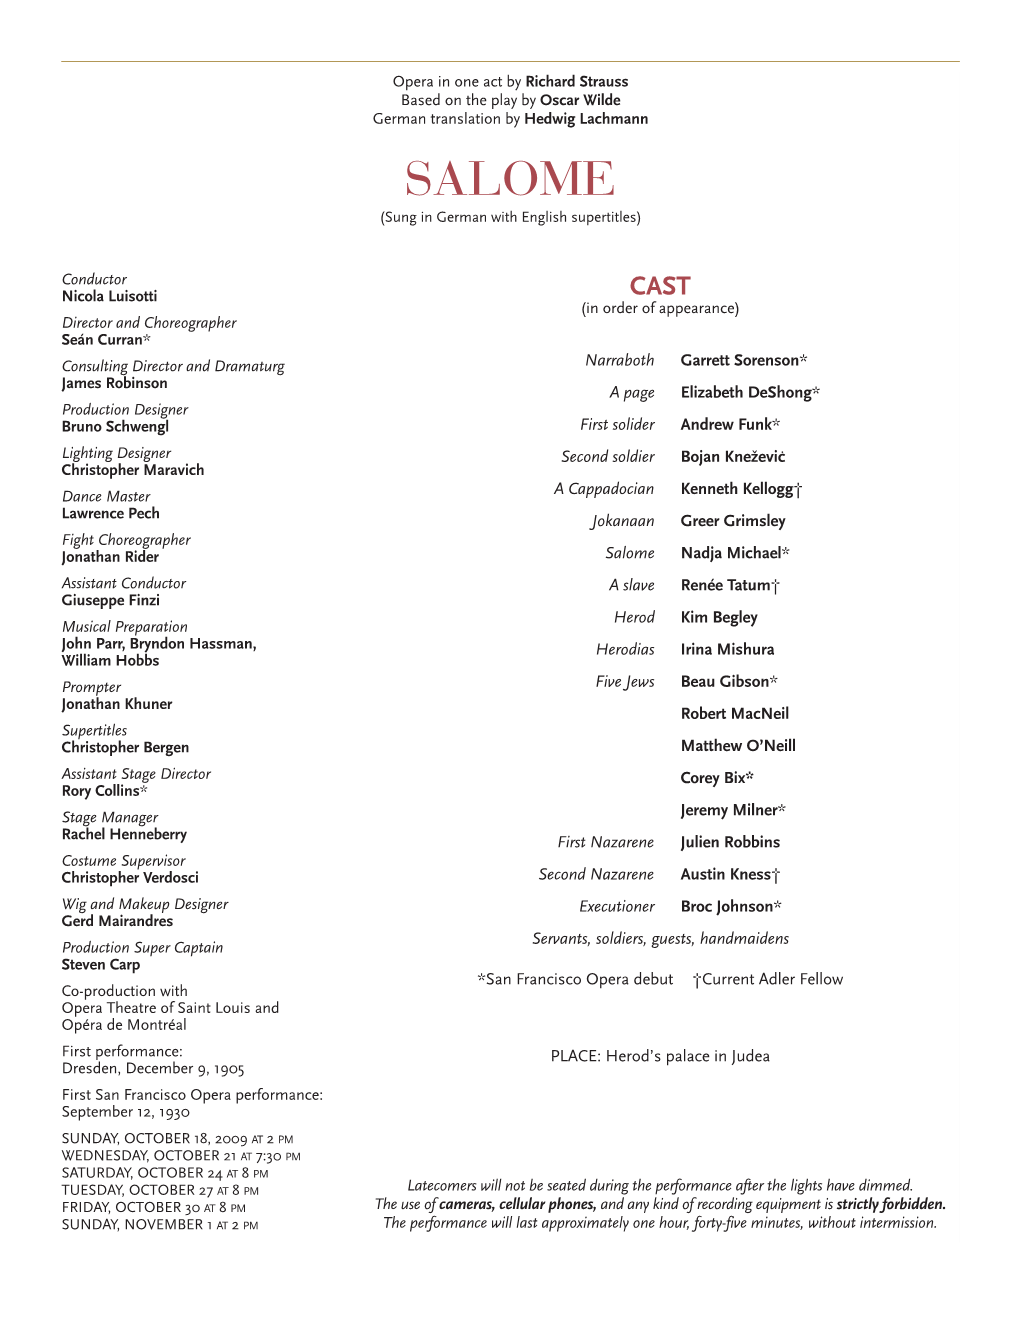 SALOME (Sung in German with English Supertitles)